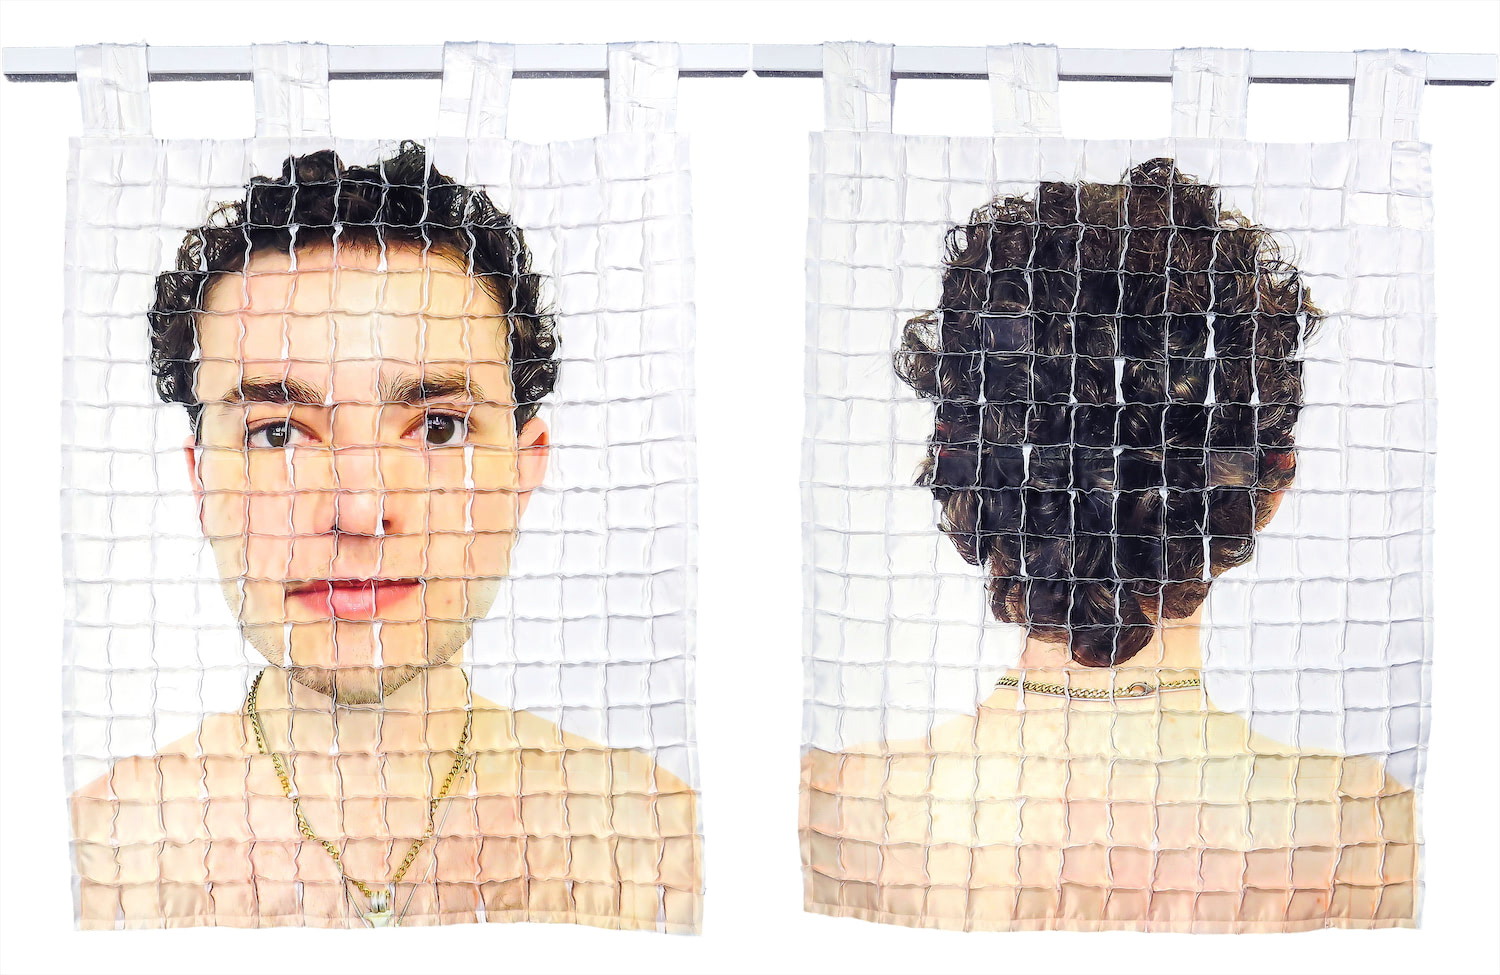 Left: Front side of quilt #2 with the artist's face distorted by a gridded system of seams that are sticking out. Right: Back side of quilt #2 with the back of the artist's head and shoulders distorted by a gridded system of seams that are sticking out.